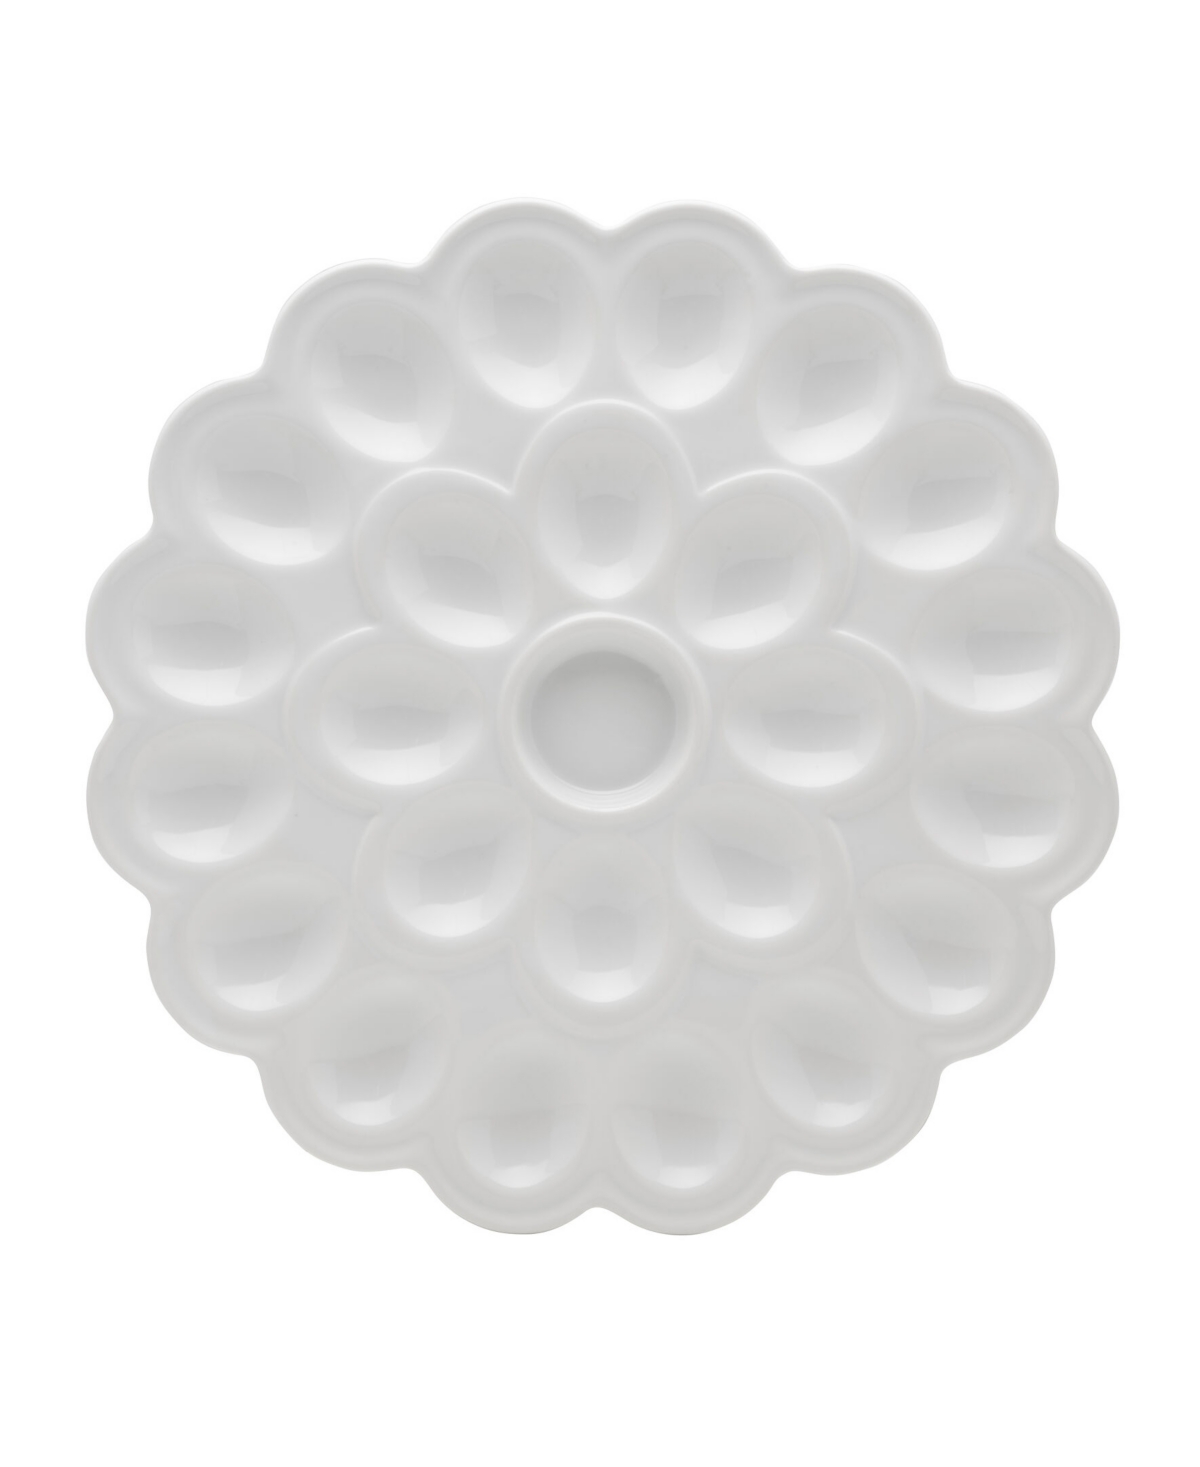 Fitz And Floyd Everyday 24 Count Porcelain Flower Egg Tray In White